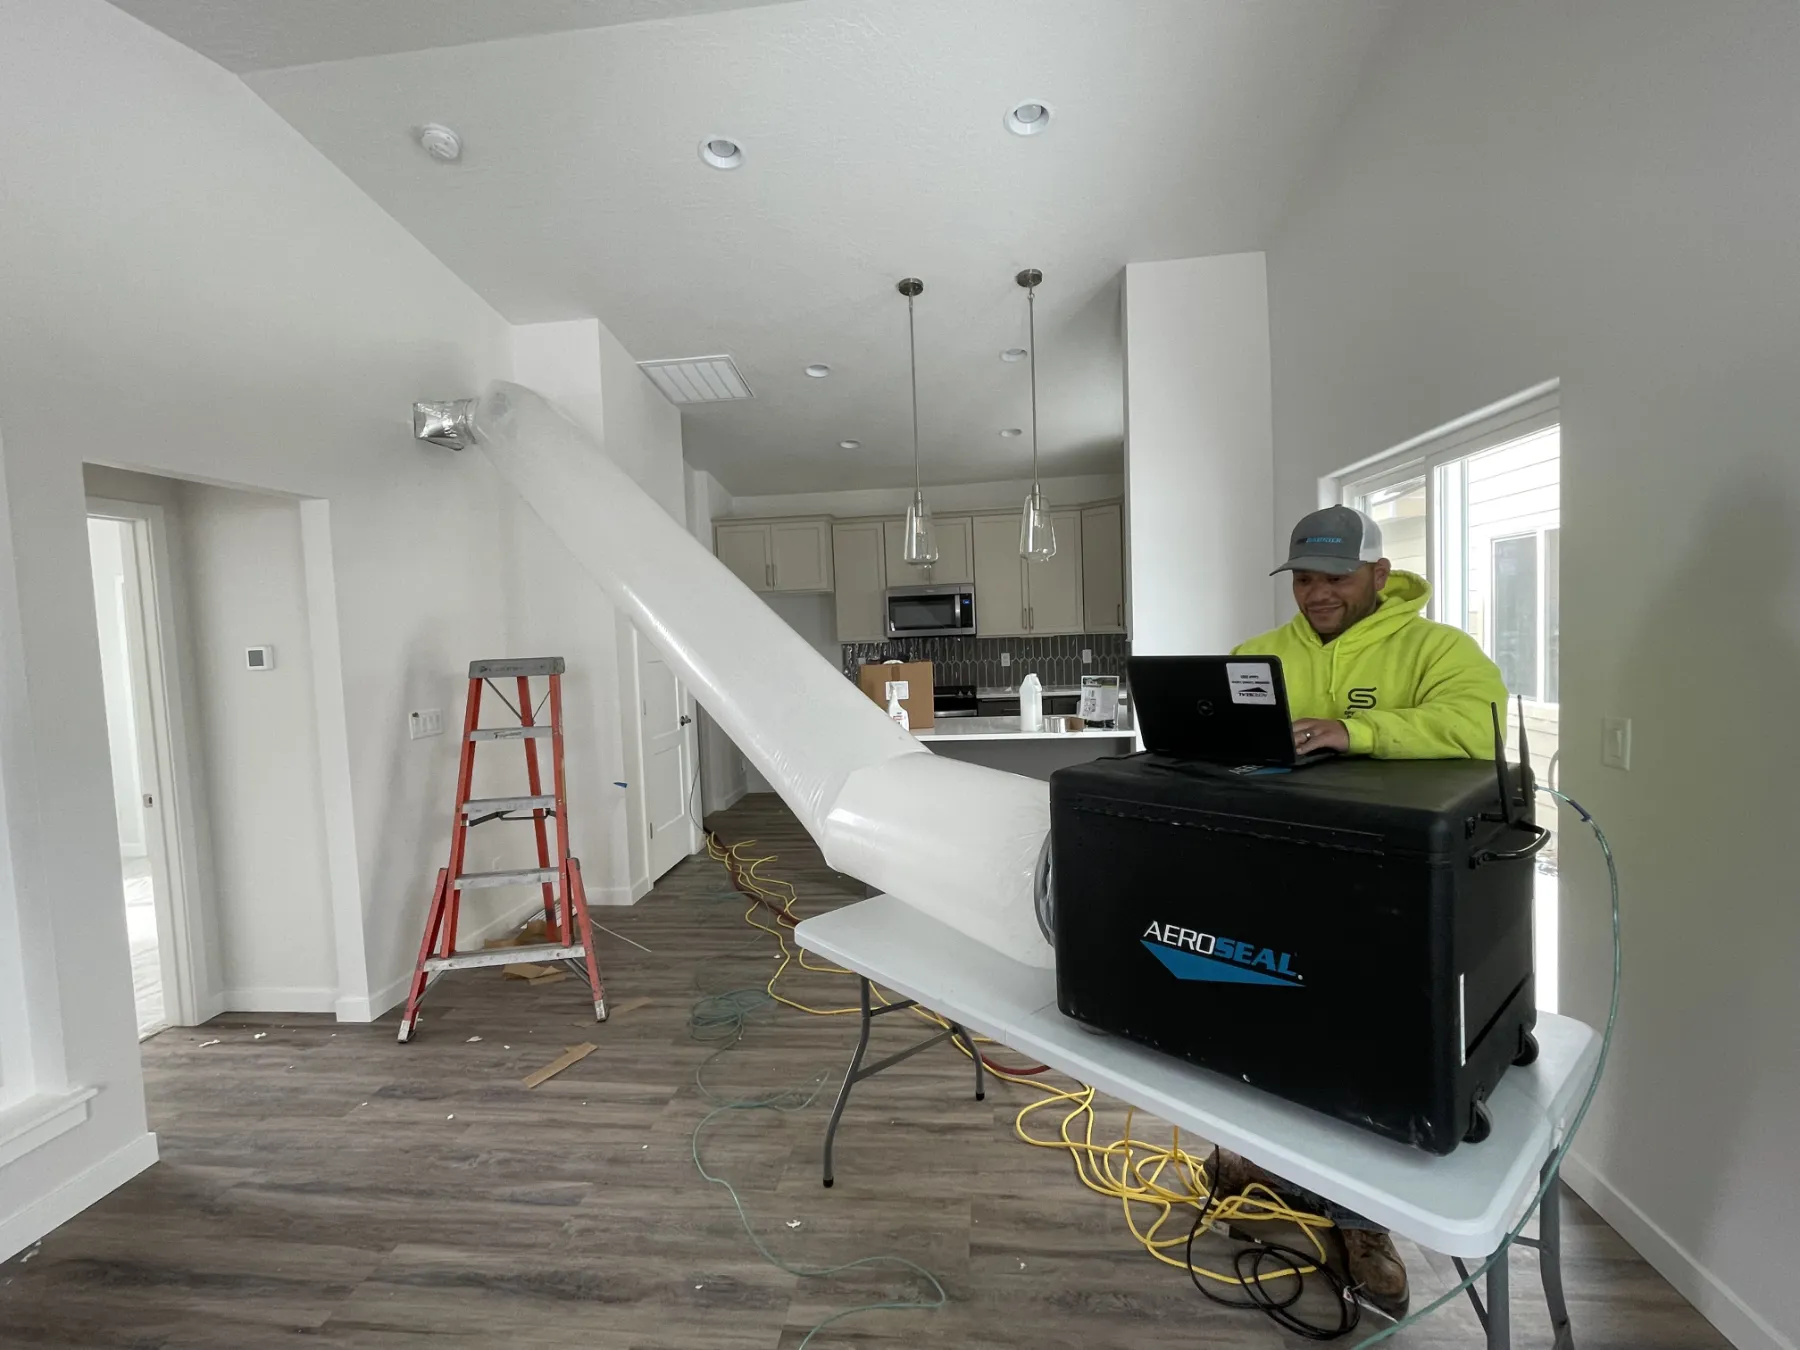 AeroSeal being applied by our team in a newly built home.